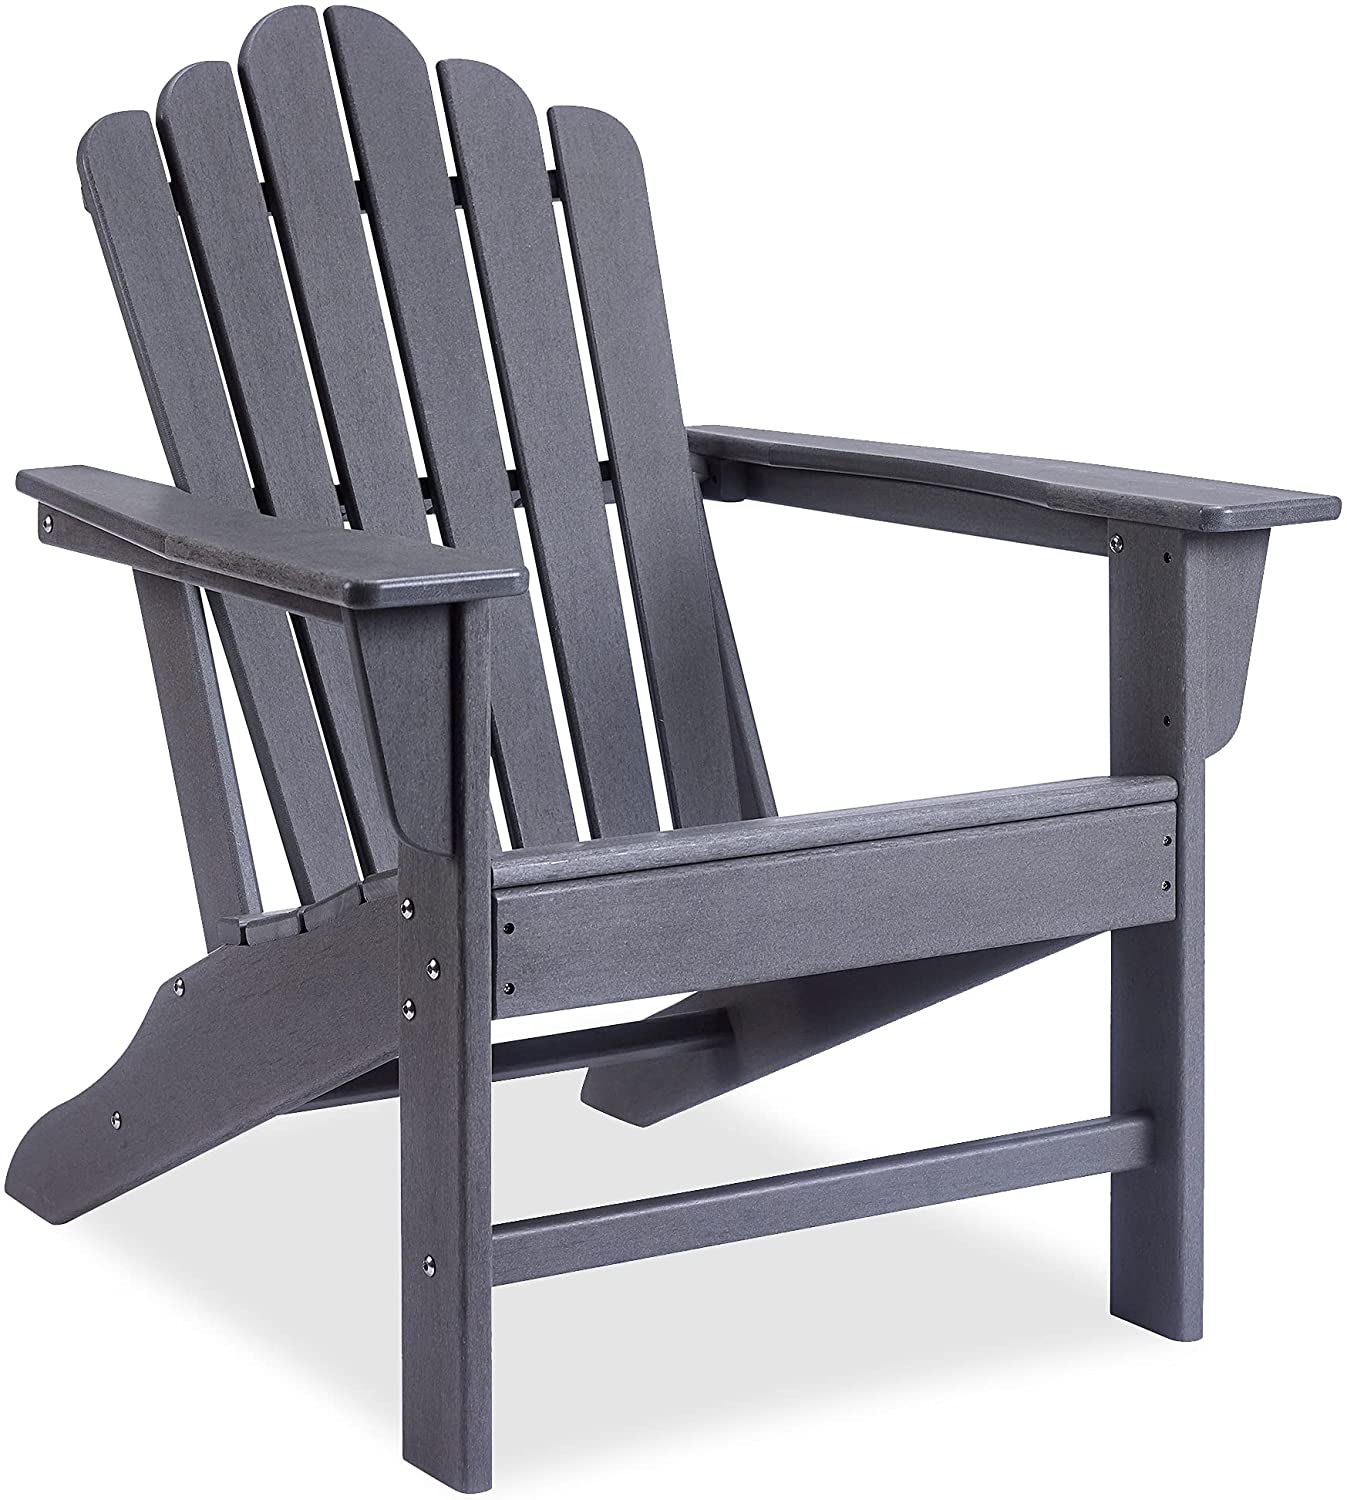 Ehomeline All-Weather Adirondack Chair